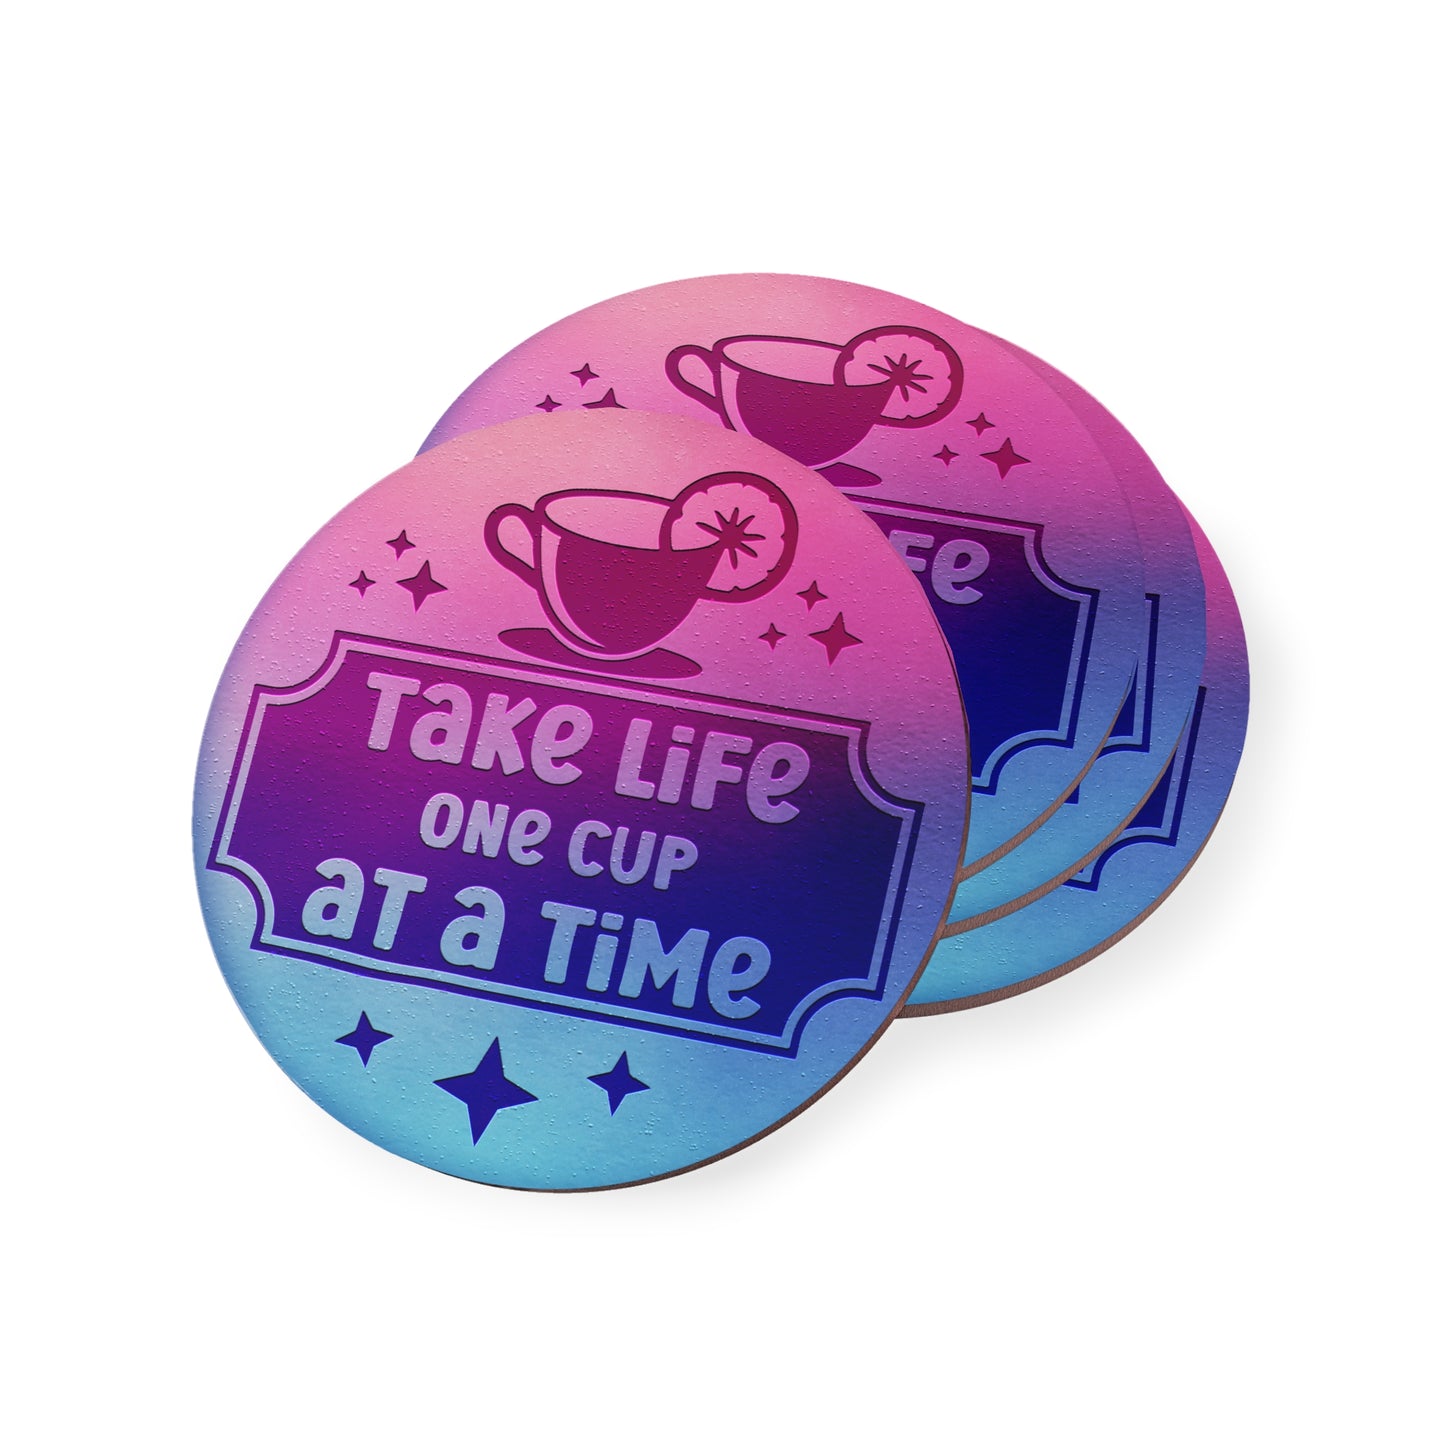 " Take Life One Cup At A Time " Round Coasters